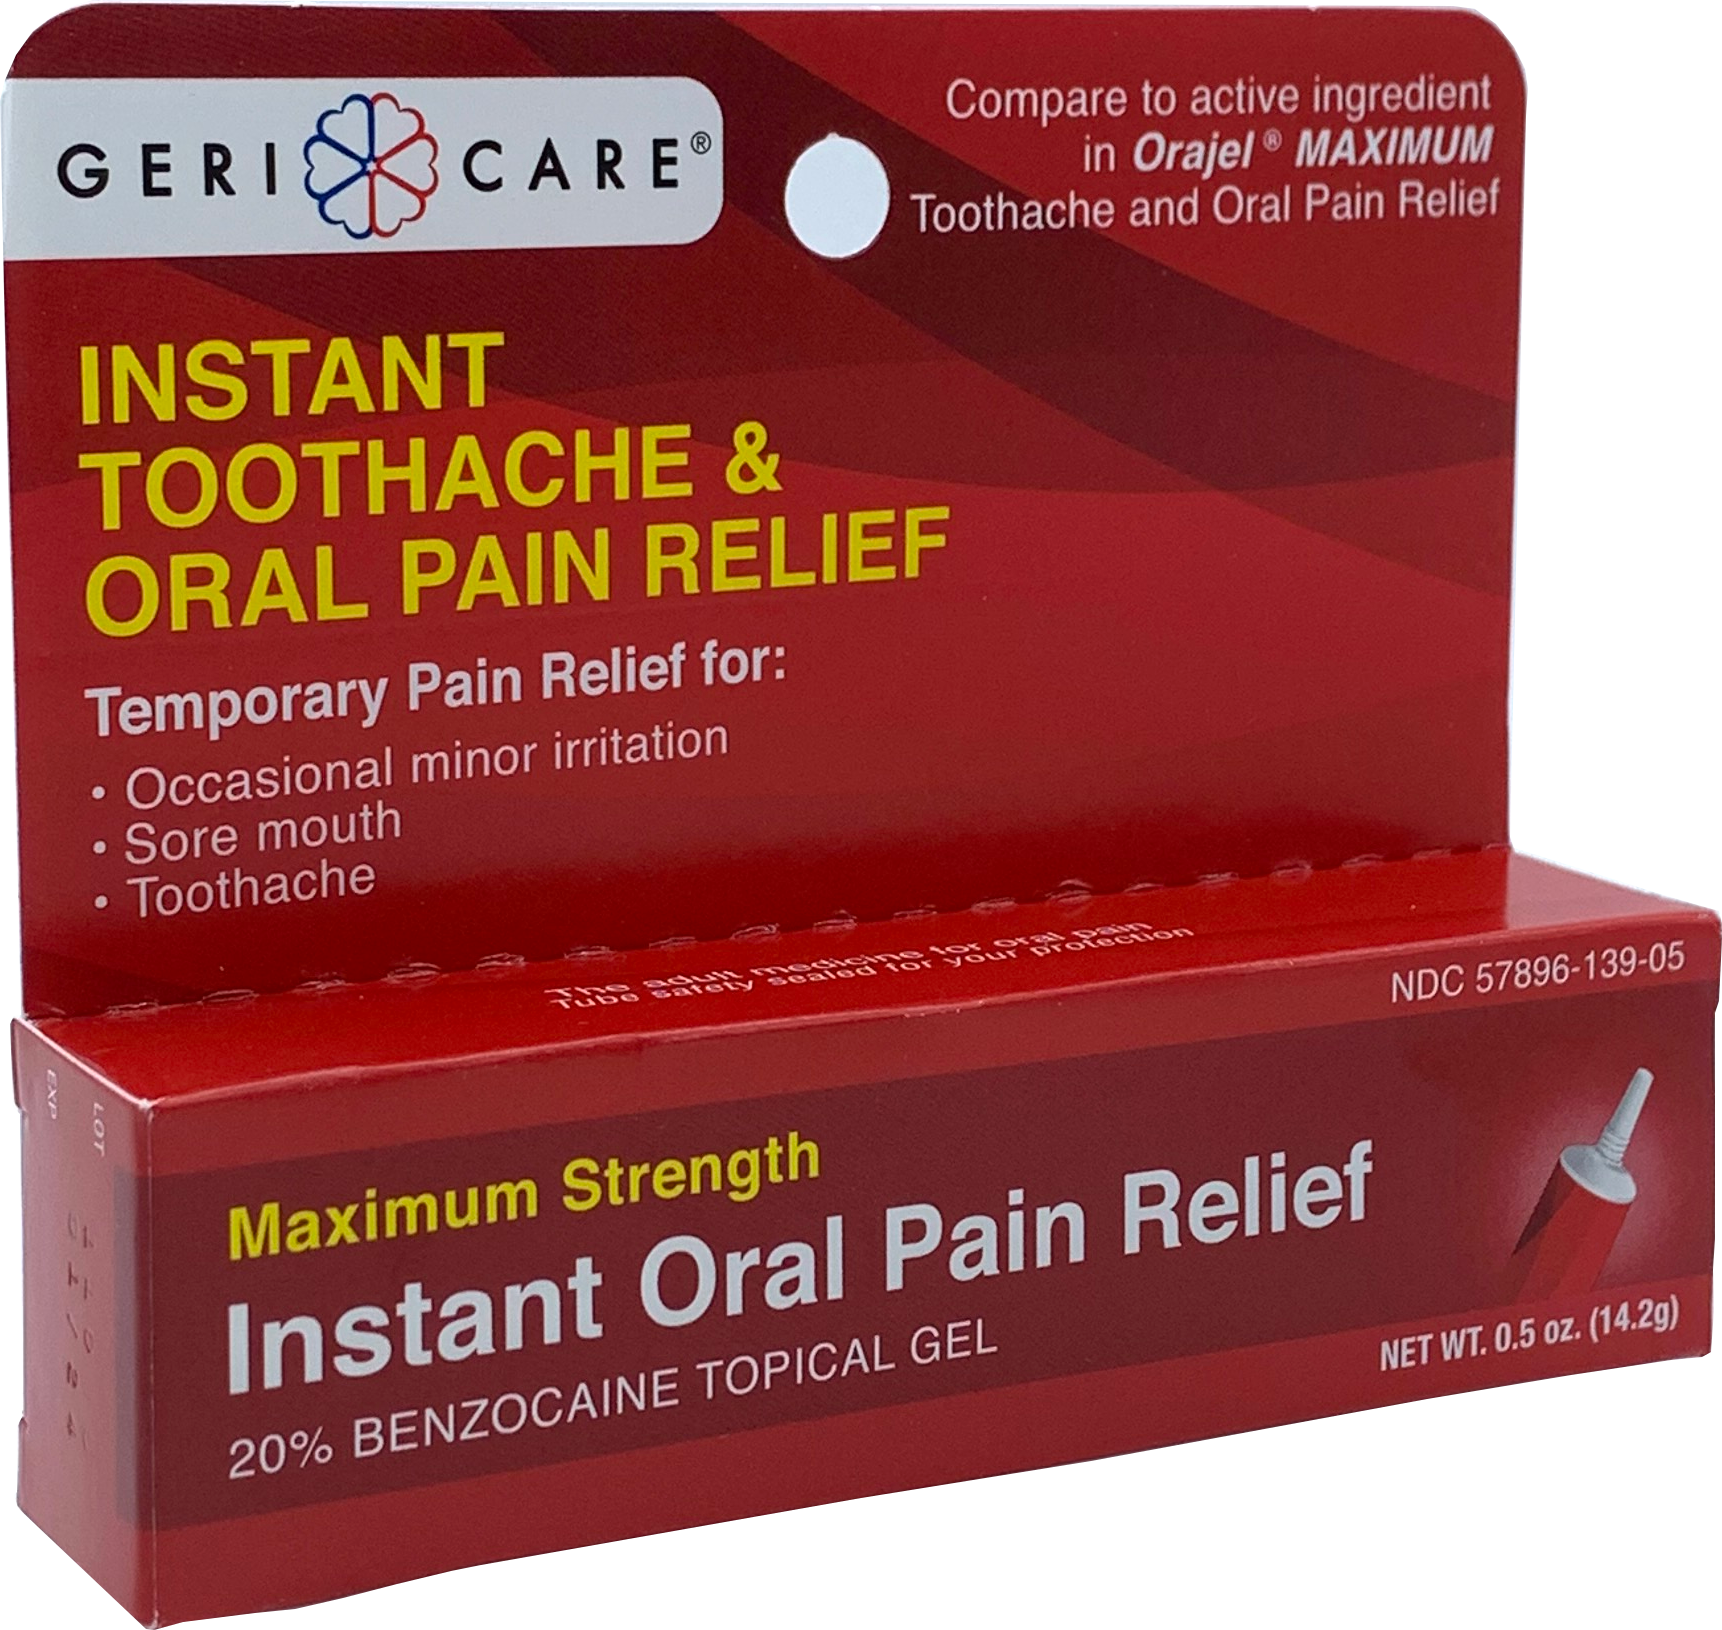 Instant Toothache & Oral Pain Relief